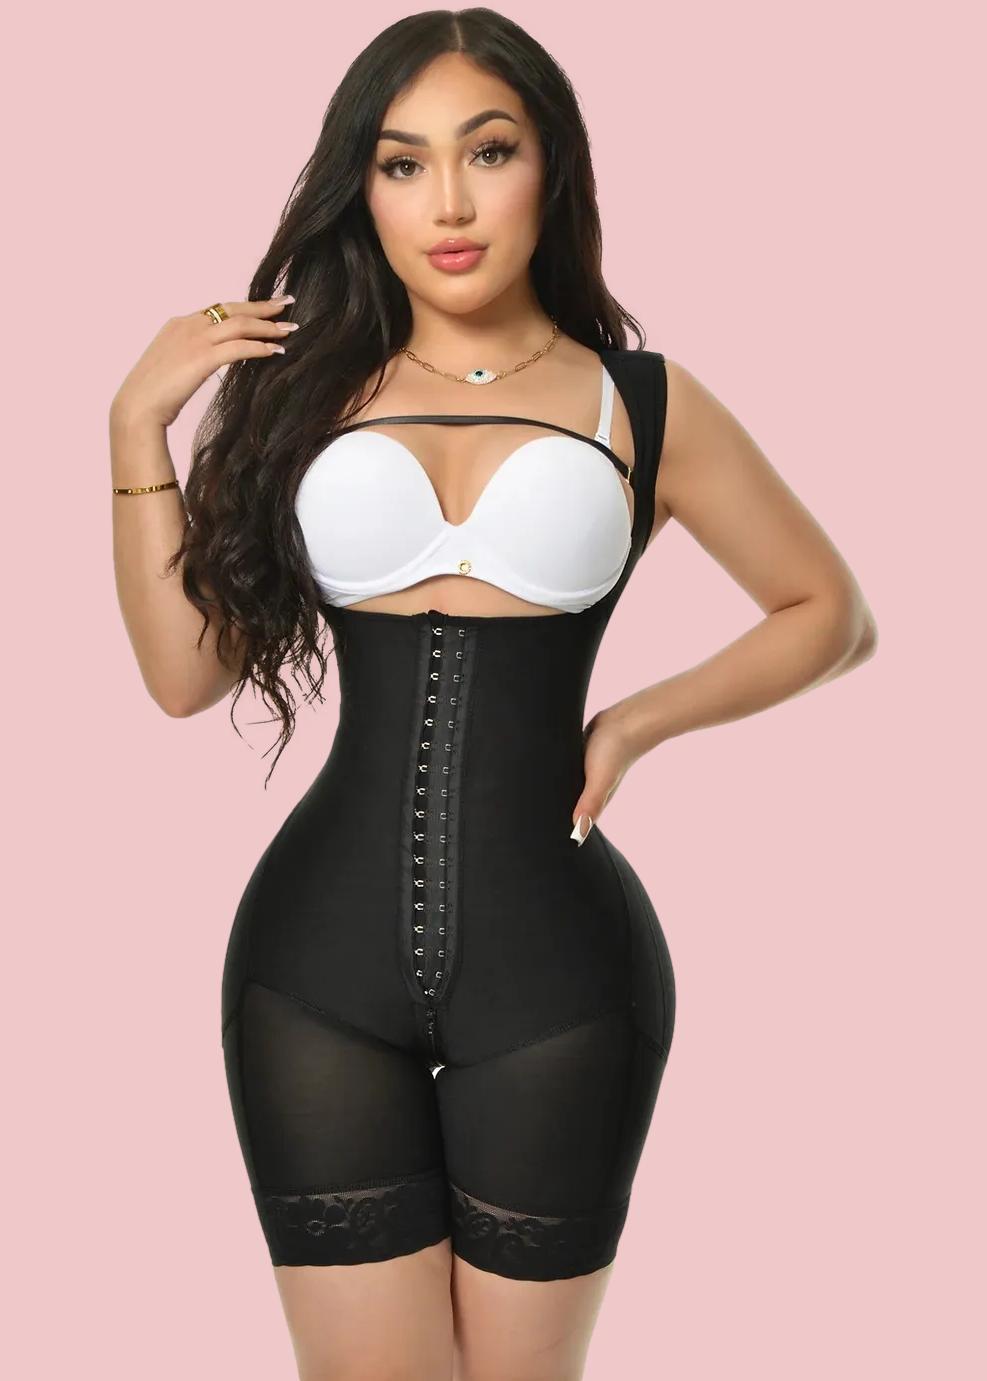 Buy SHAPSHE Shapewear for Women Tummy Control Fajas Colombianas Post  Surgery Compression Garment Butt Lifter Body Shaper, Black, Small at